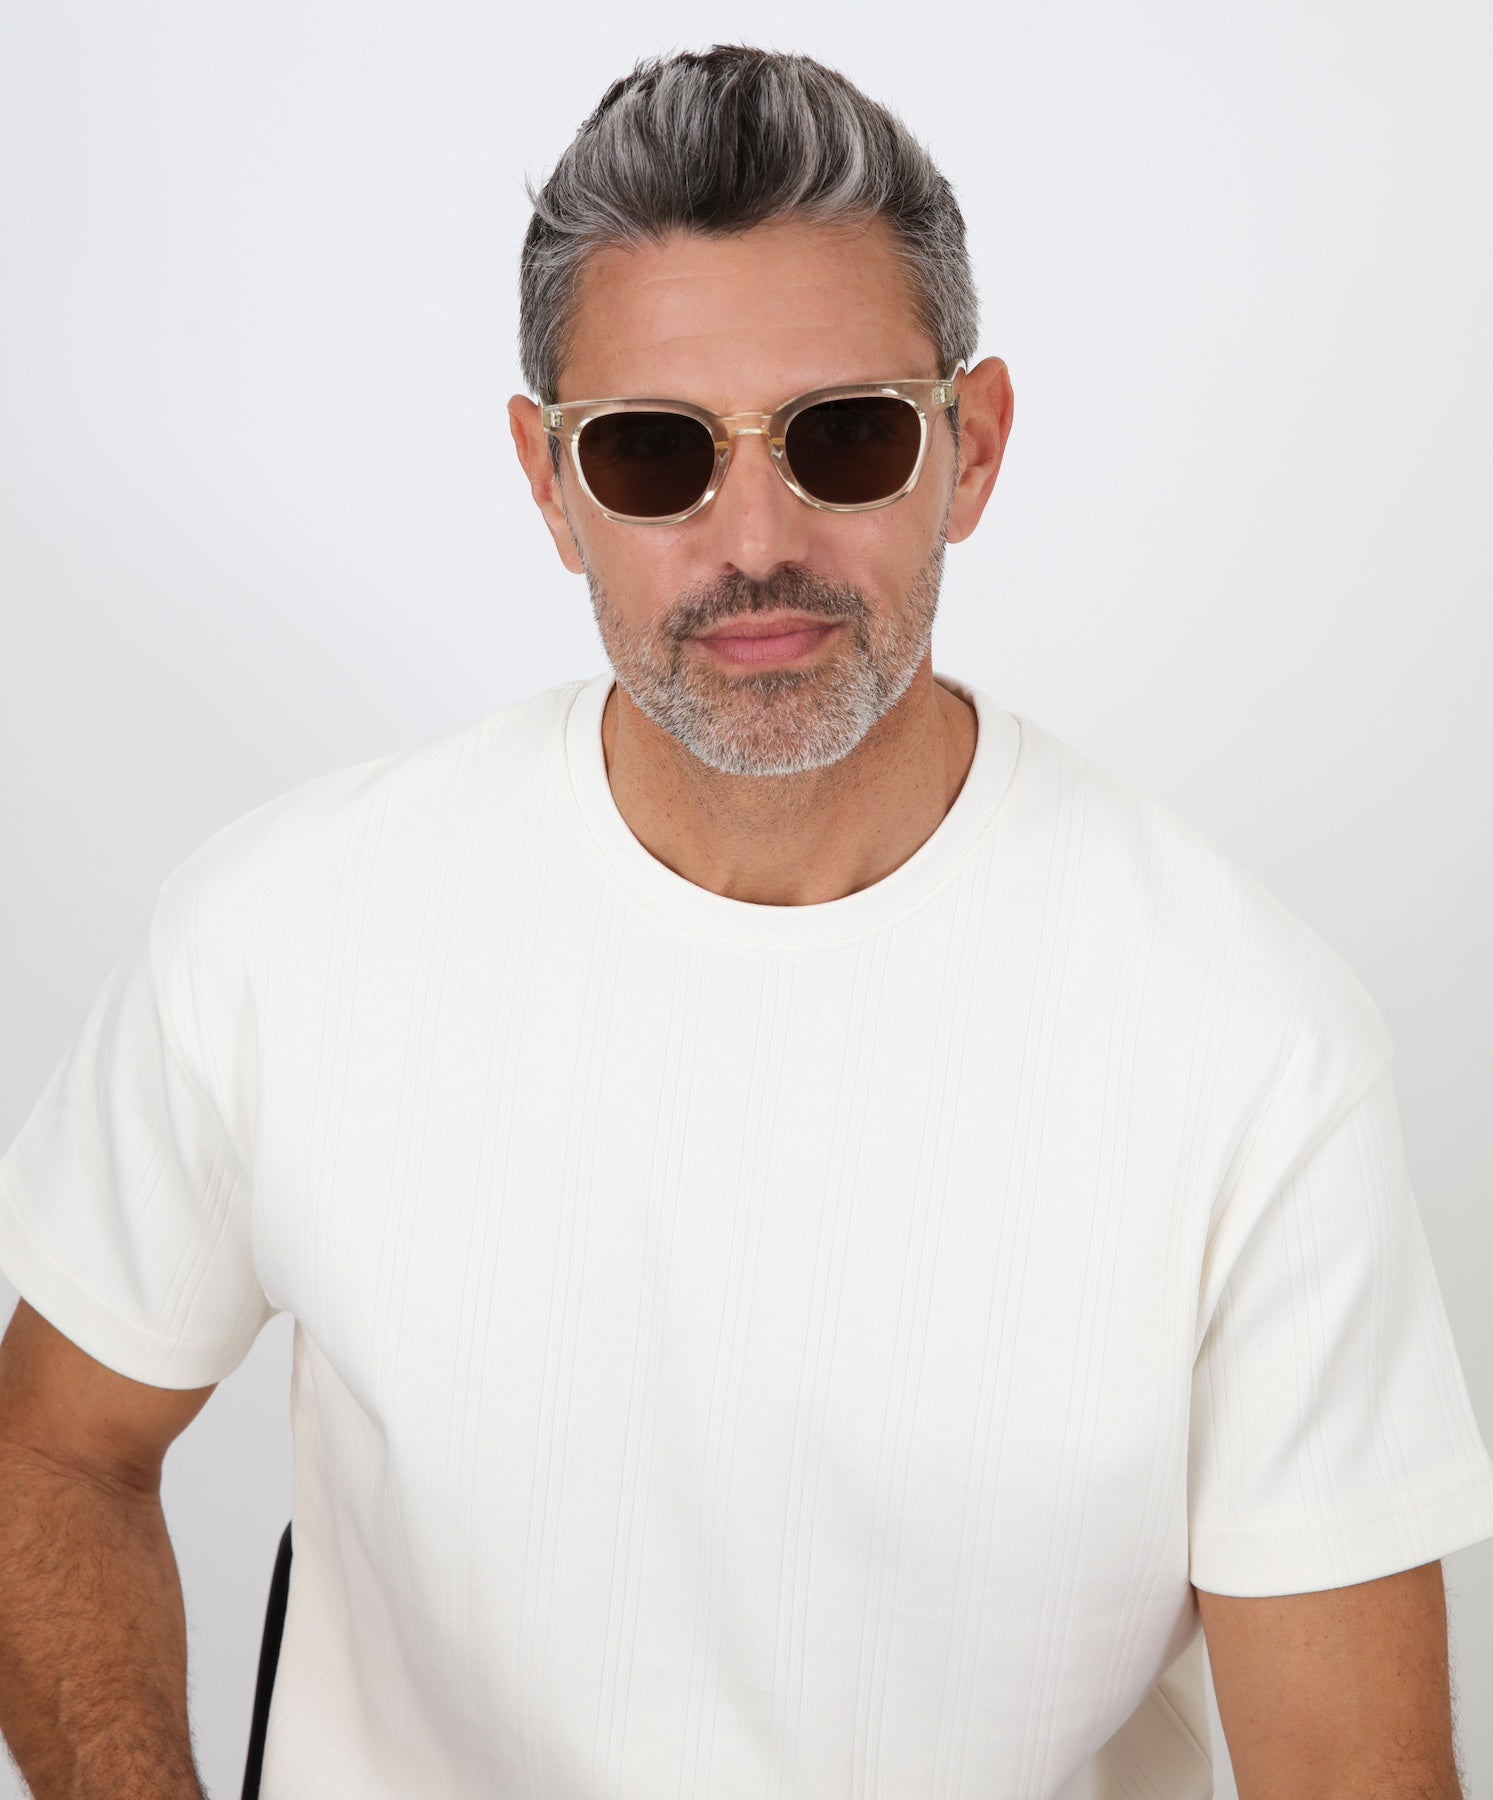 Model with salt and pepper hair and beard wearing Veneto Sunglasses in Champagne with Brown lenses.